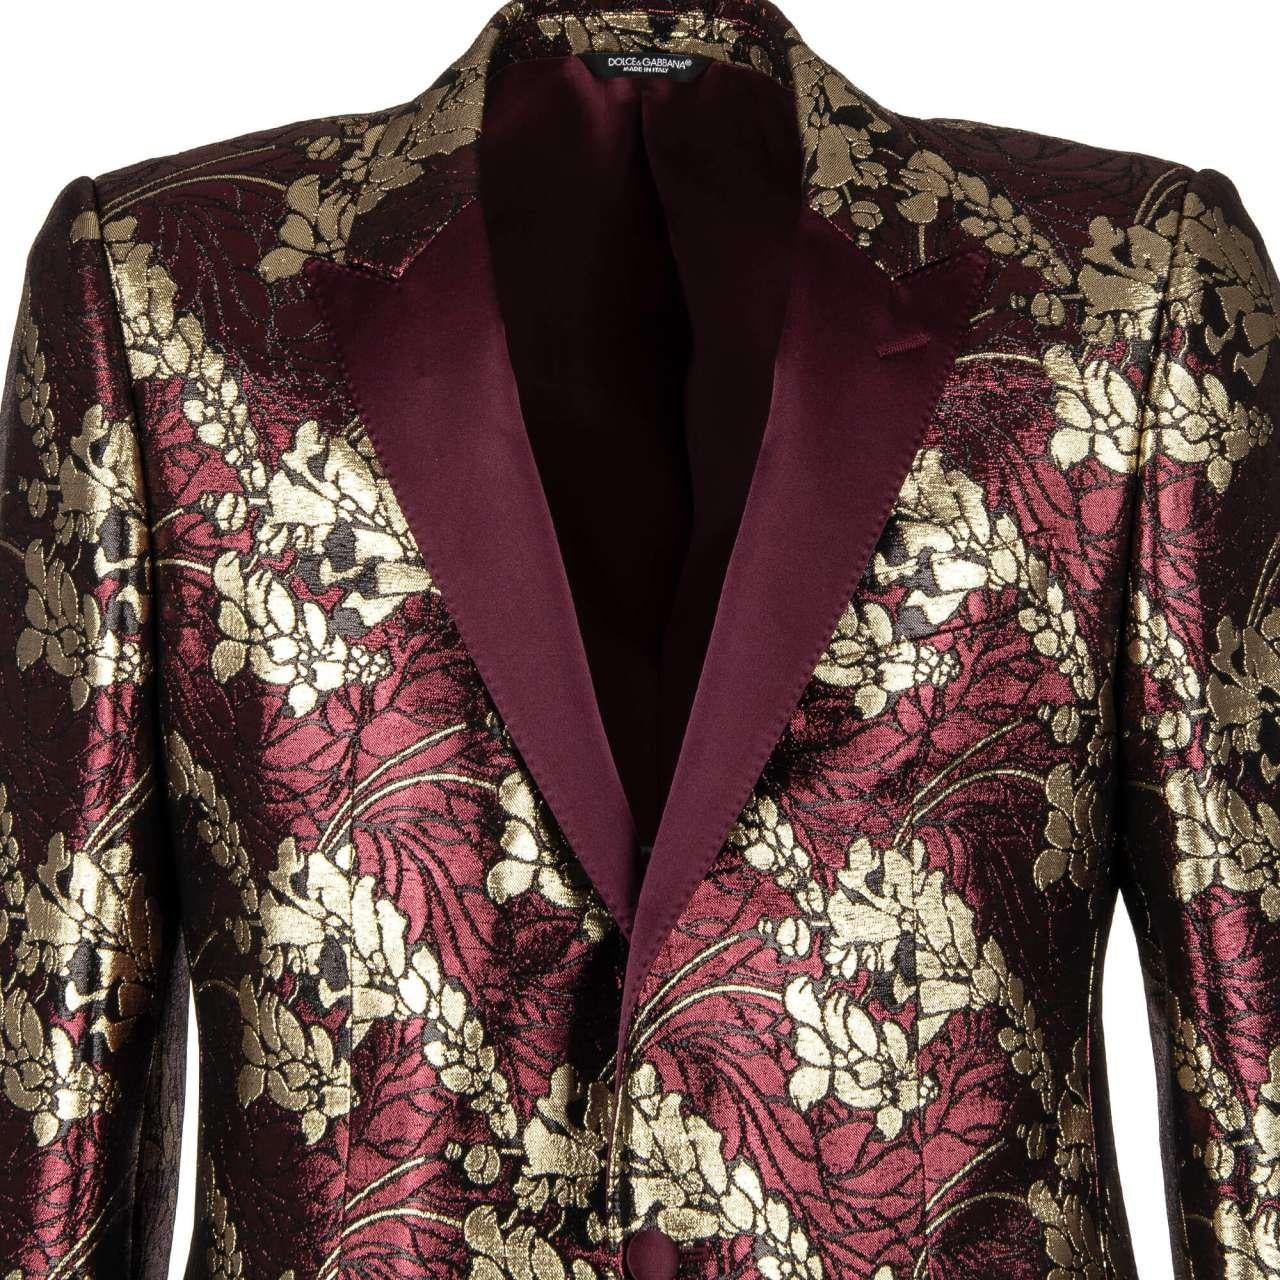 - Floral shiny lurex tuxedo / blazer MARTINI in bordeaux and gold with a contrast silk peak lapel by DOLCE & GABBANA - Former RRP: EUR 2.350 - Made In Italy - New with Tag - Slim Fit - Model: G2LL4T-FJM37-S8350 - Material: 92% Polyester, 8% Silk -